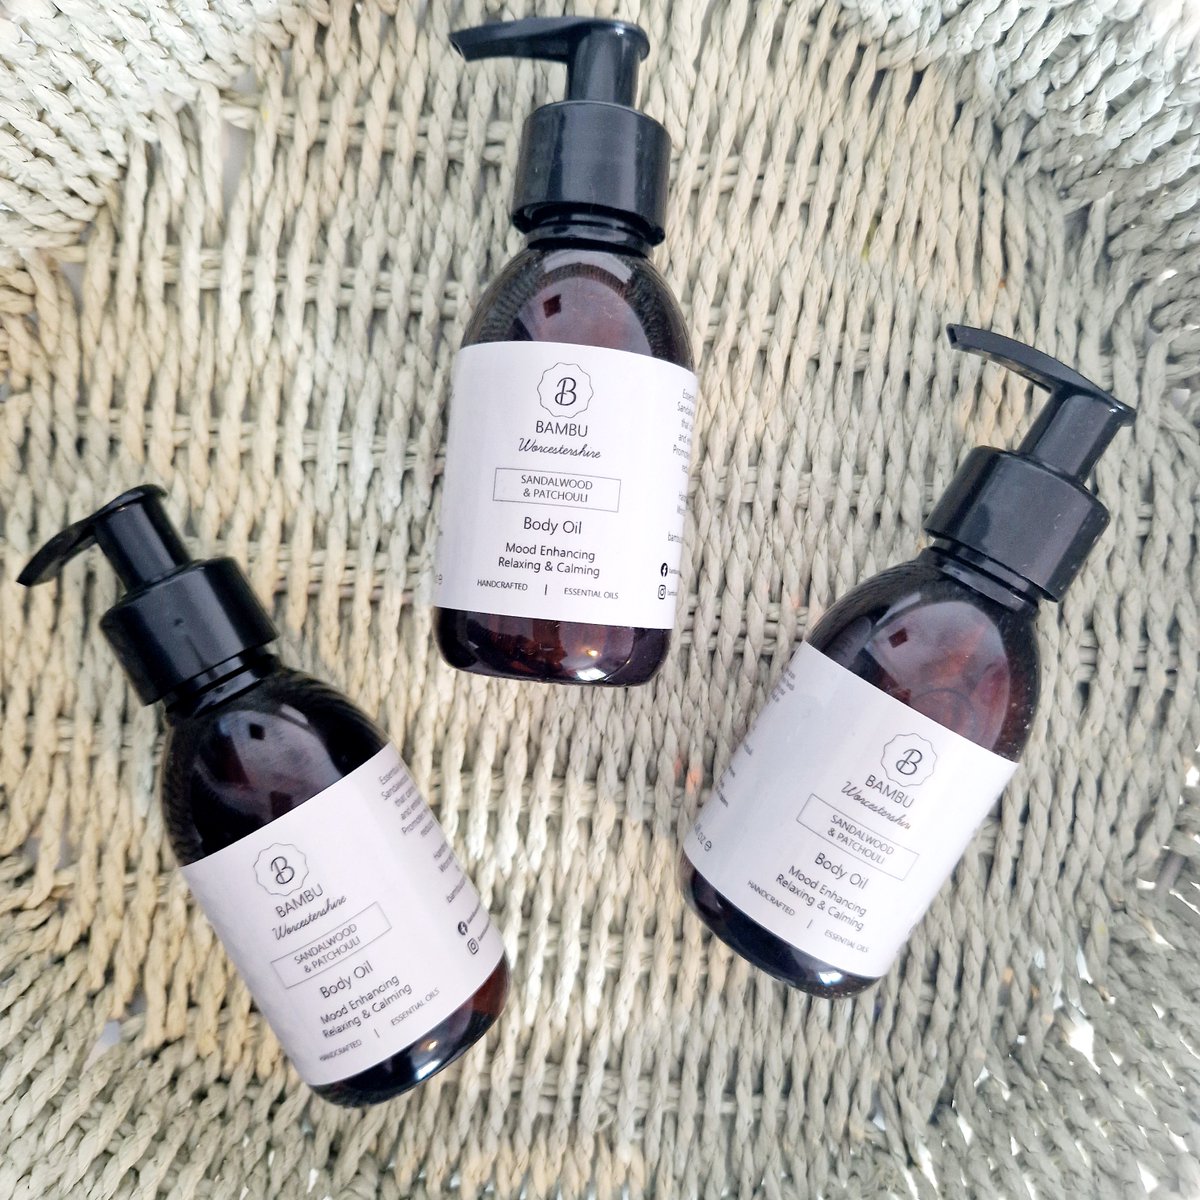 Sandalwood and Patchouli Body Oil – Massage Oil. Helps to relax & calm the mind & enhance the mood. Also promotes relaxation & reduces stress on bambuworcestershire.co.uk/Sandalwood-Pat… #bodyoil #massageoil #bodycare #worcestershirehour #ukgiftam #ukgifthour #handmadehour #aromatherapy